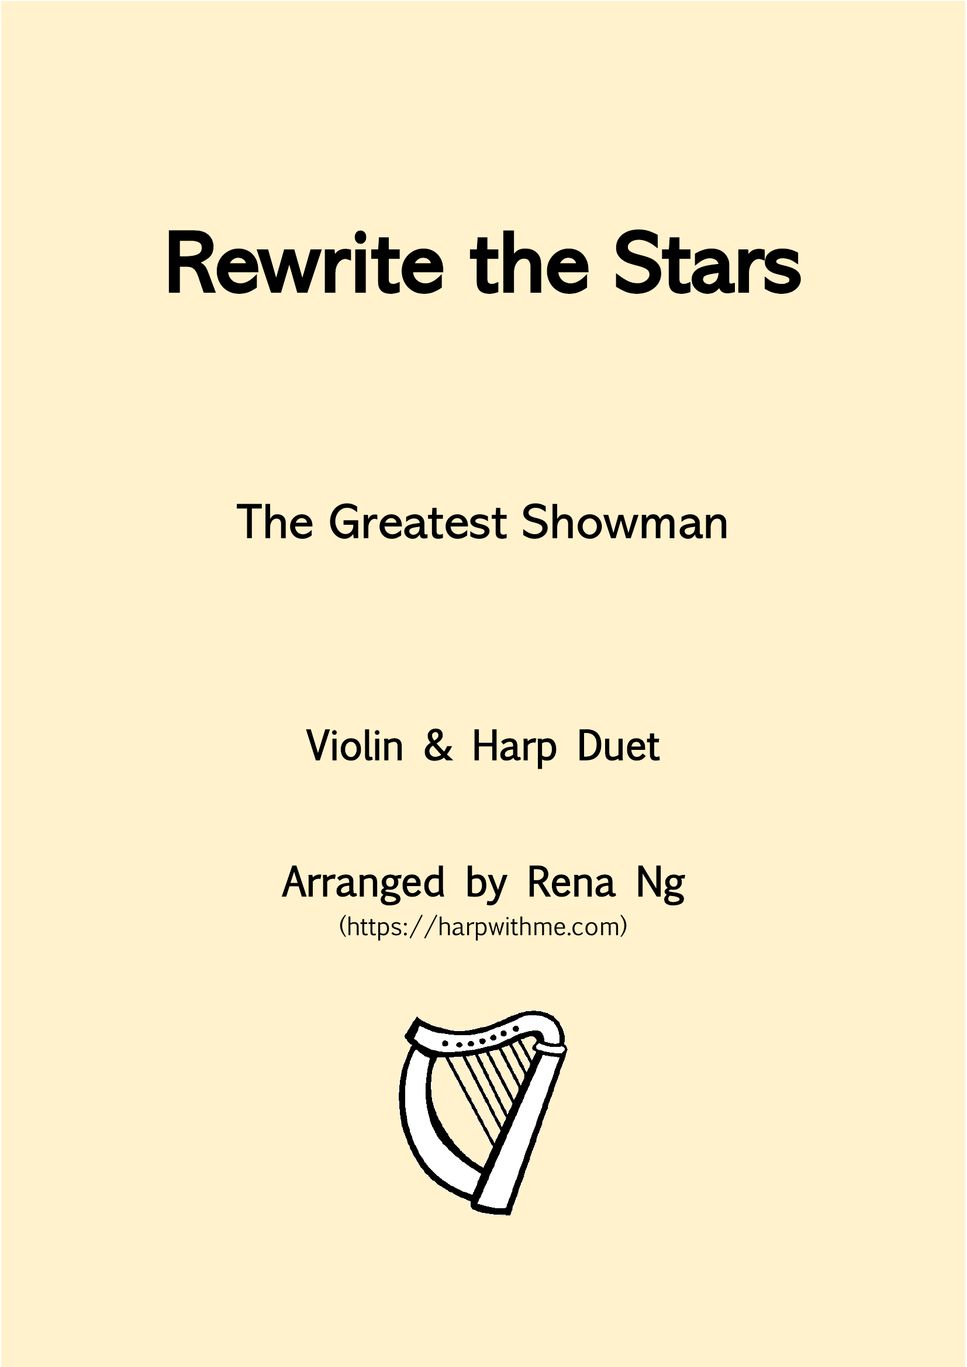 The Greatest Showman - Rewrite The Stars (Violin & Harp) by Harp With Me